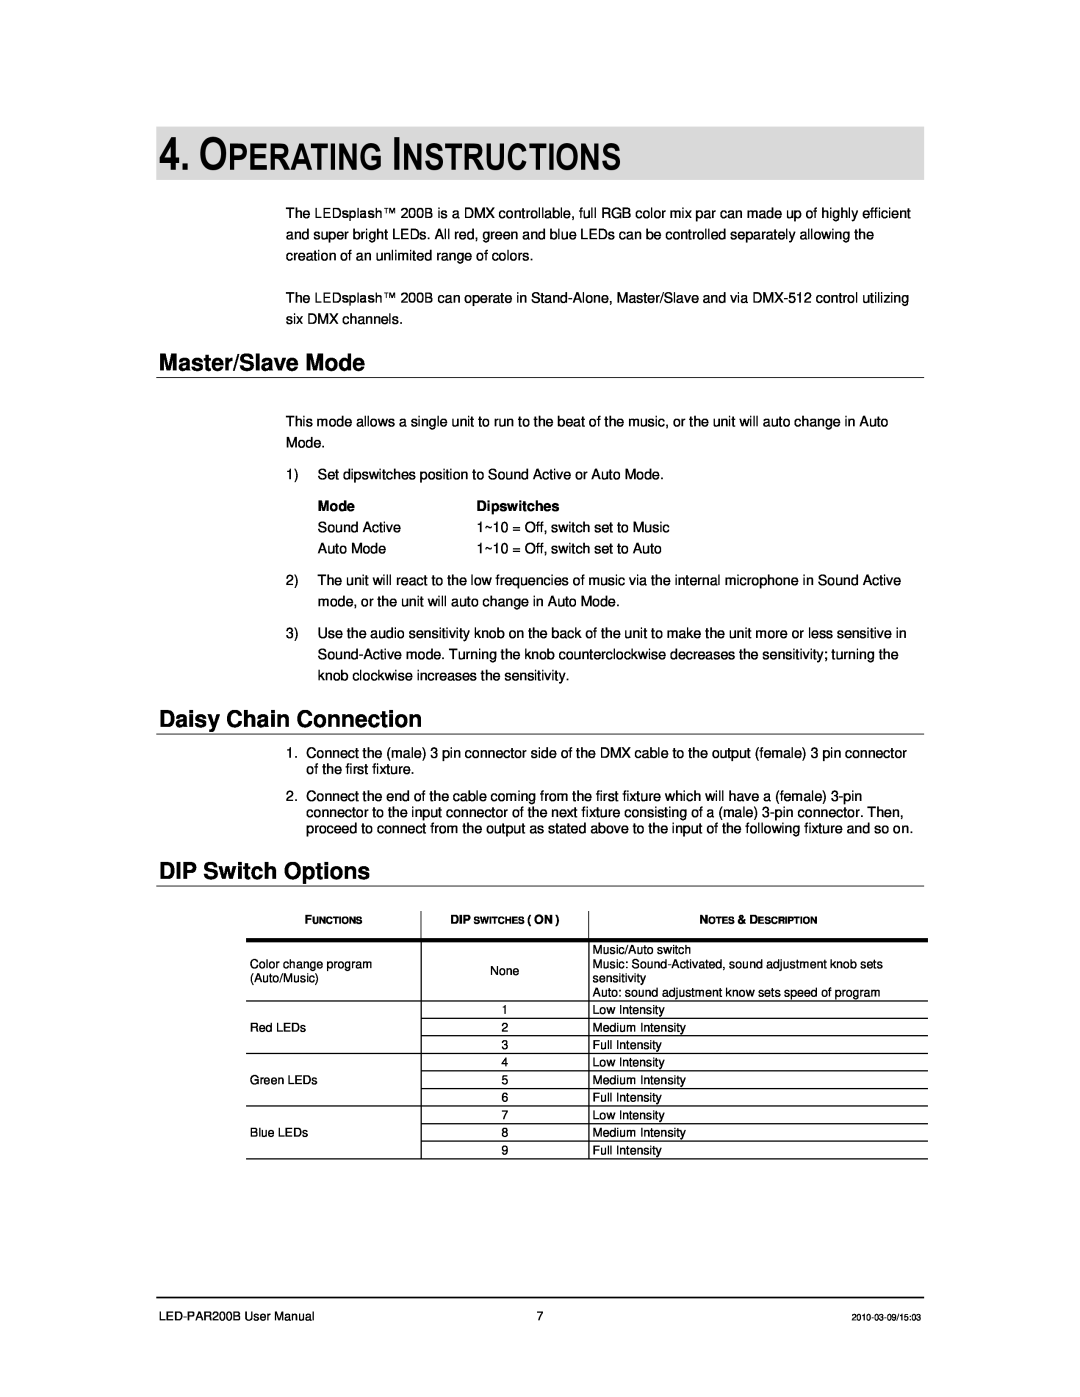 Chauvet 200B user manual Operating Instructions, Master/Slave Mode, Daisy Chain Connection, DIP Switch Options, Dipswitches 